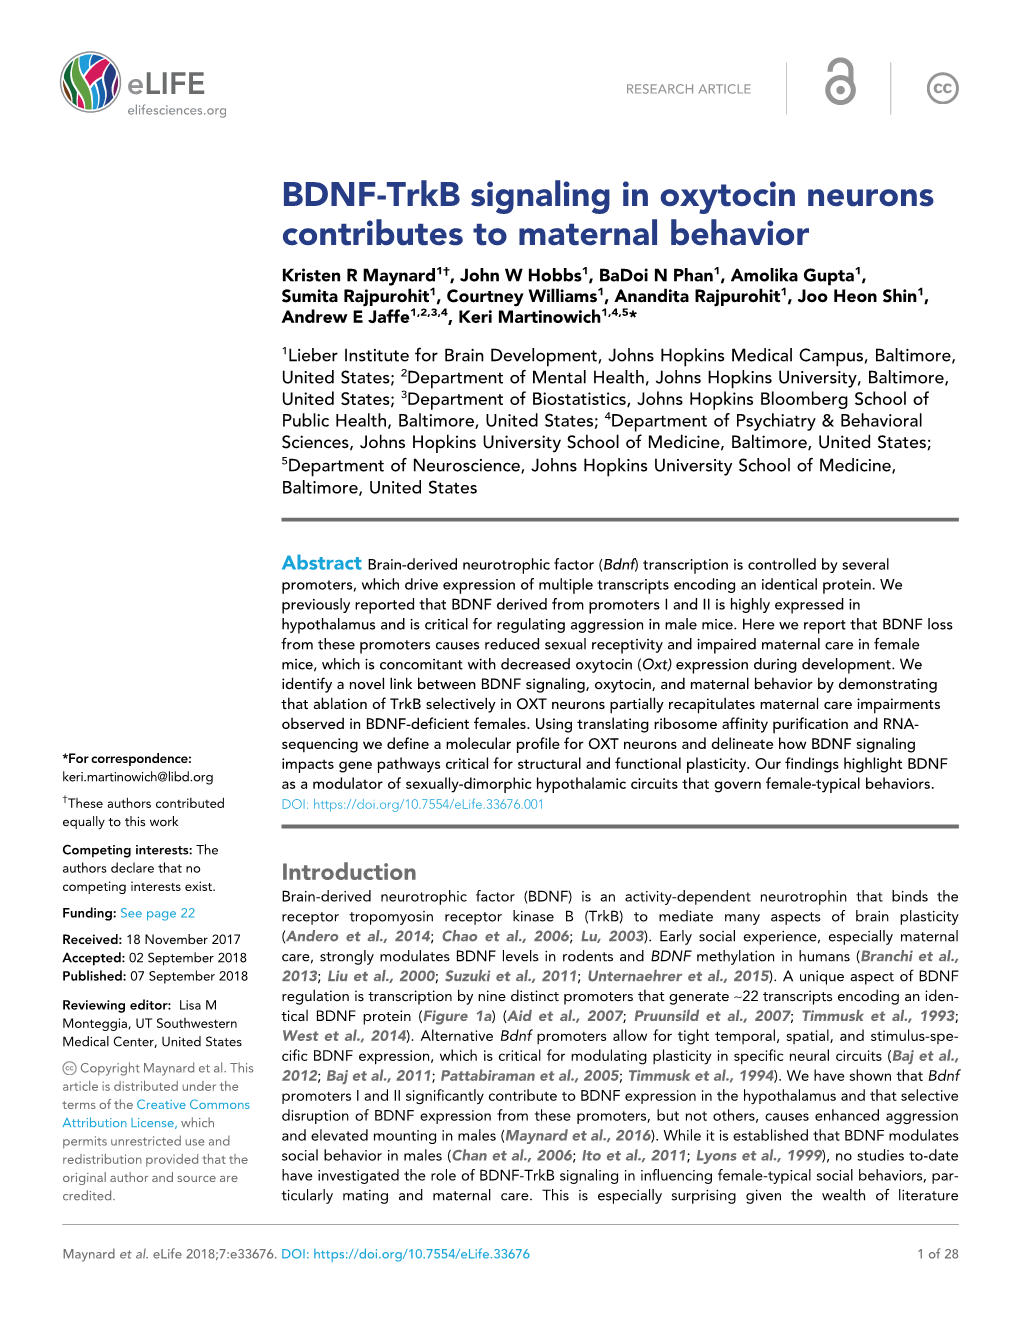 BDNF-Trkb Signaling in Oxytocin Neurons Contributes to Maternal